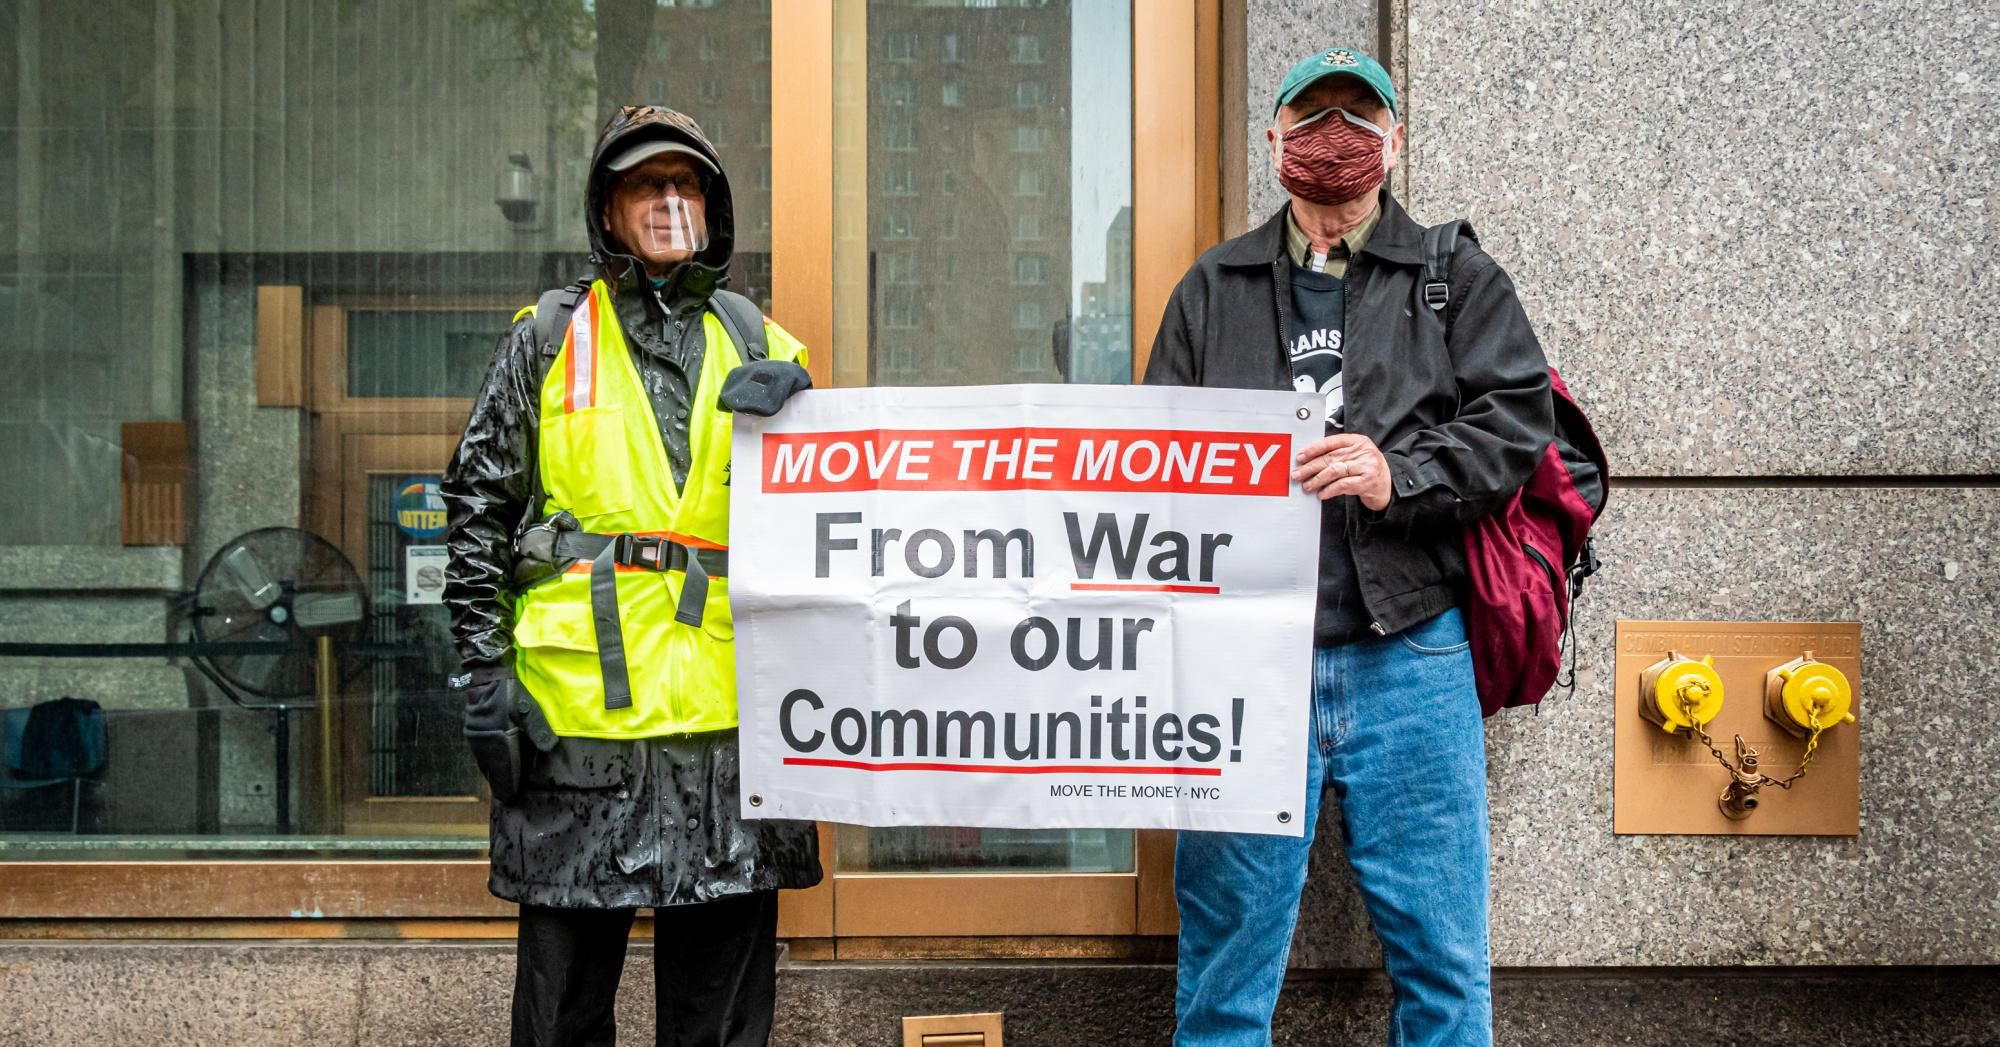 Peace activists gathered outside the Internal Revenue Service offices in Manhattan on April 15, 2021 to protest against spending federal tax dollars on the Pentagon and U.S. wars. (Photo: Erik McGregor/LightRocket via Getty Images)